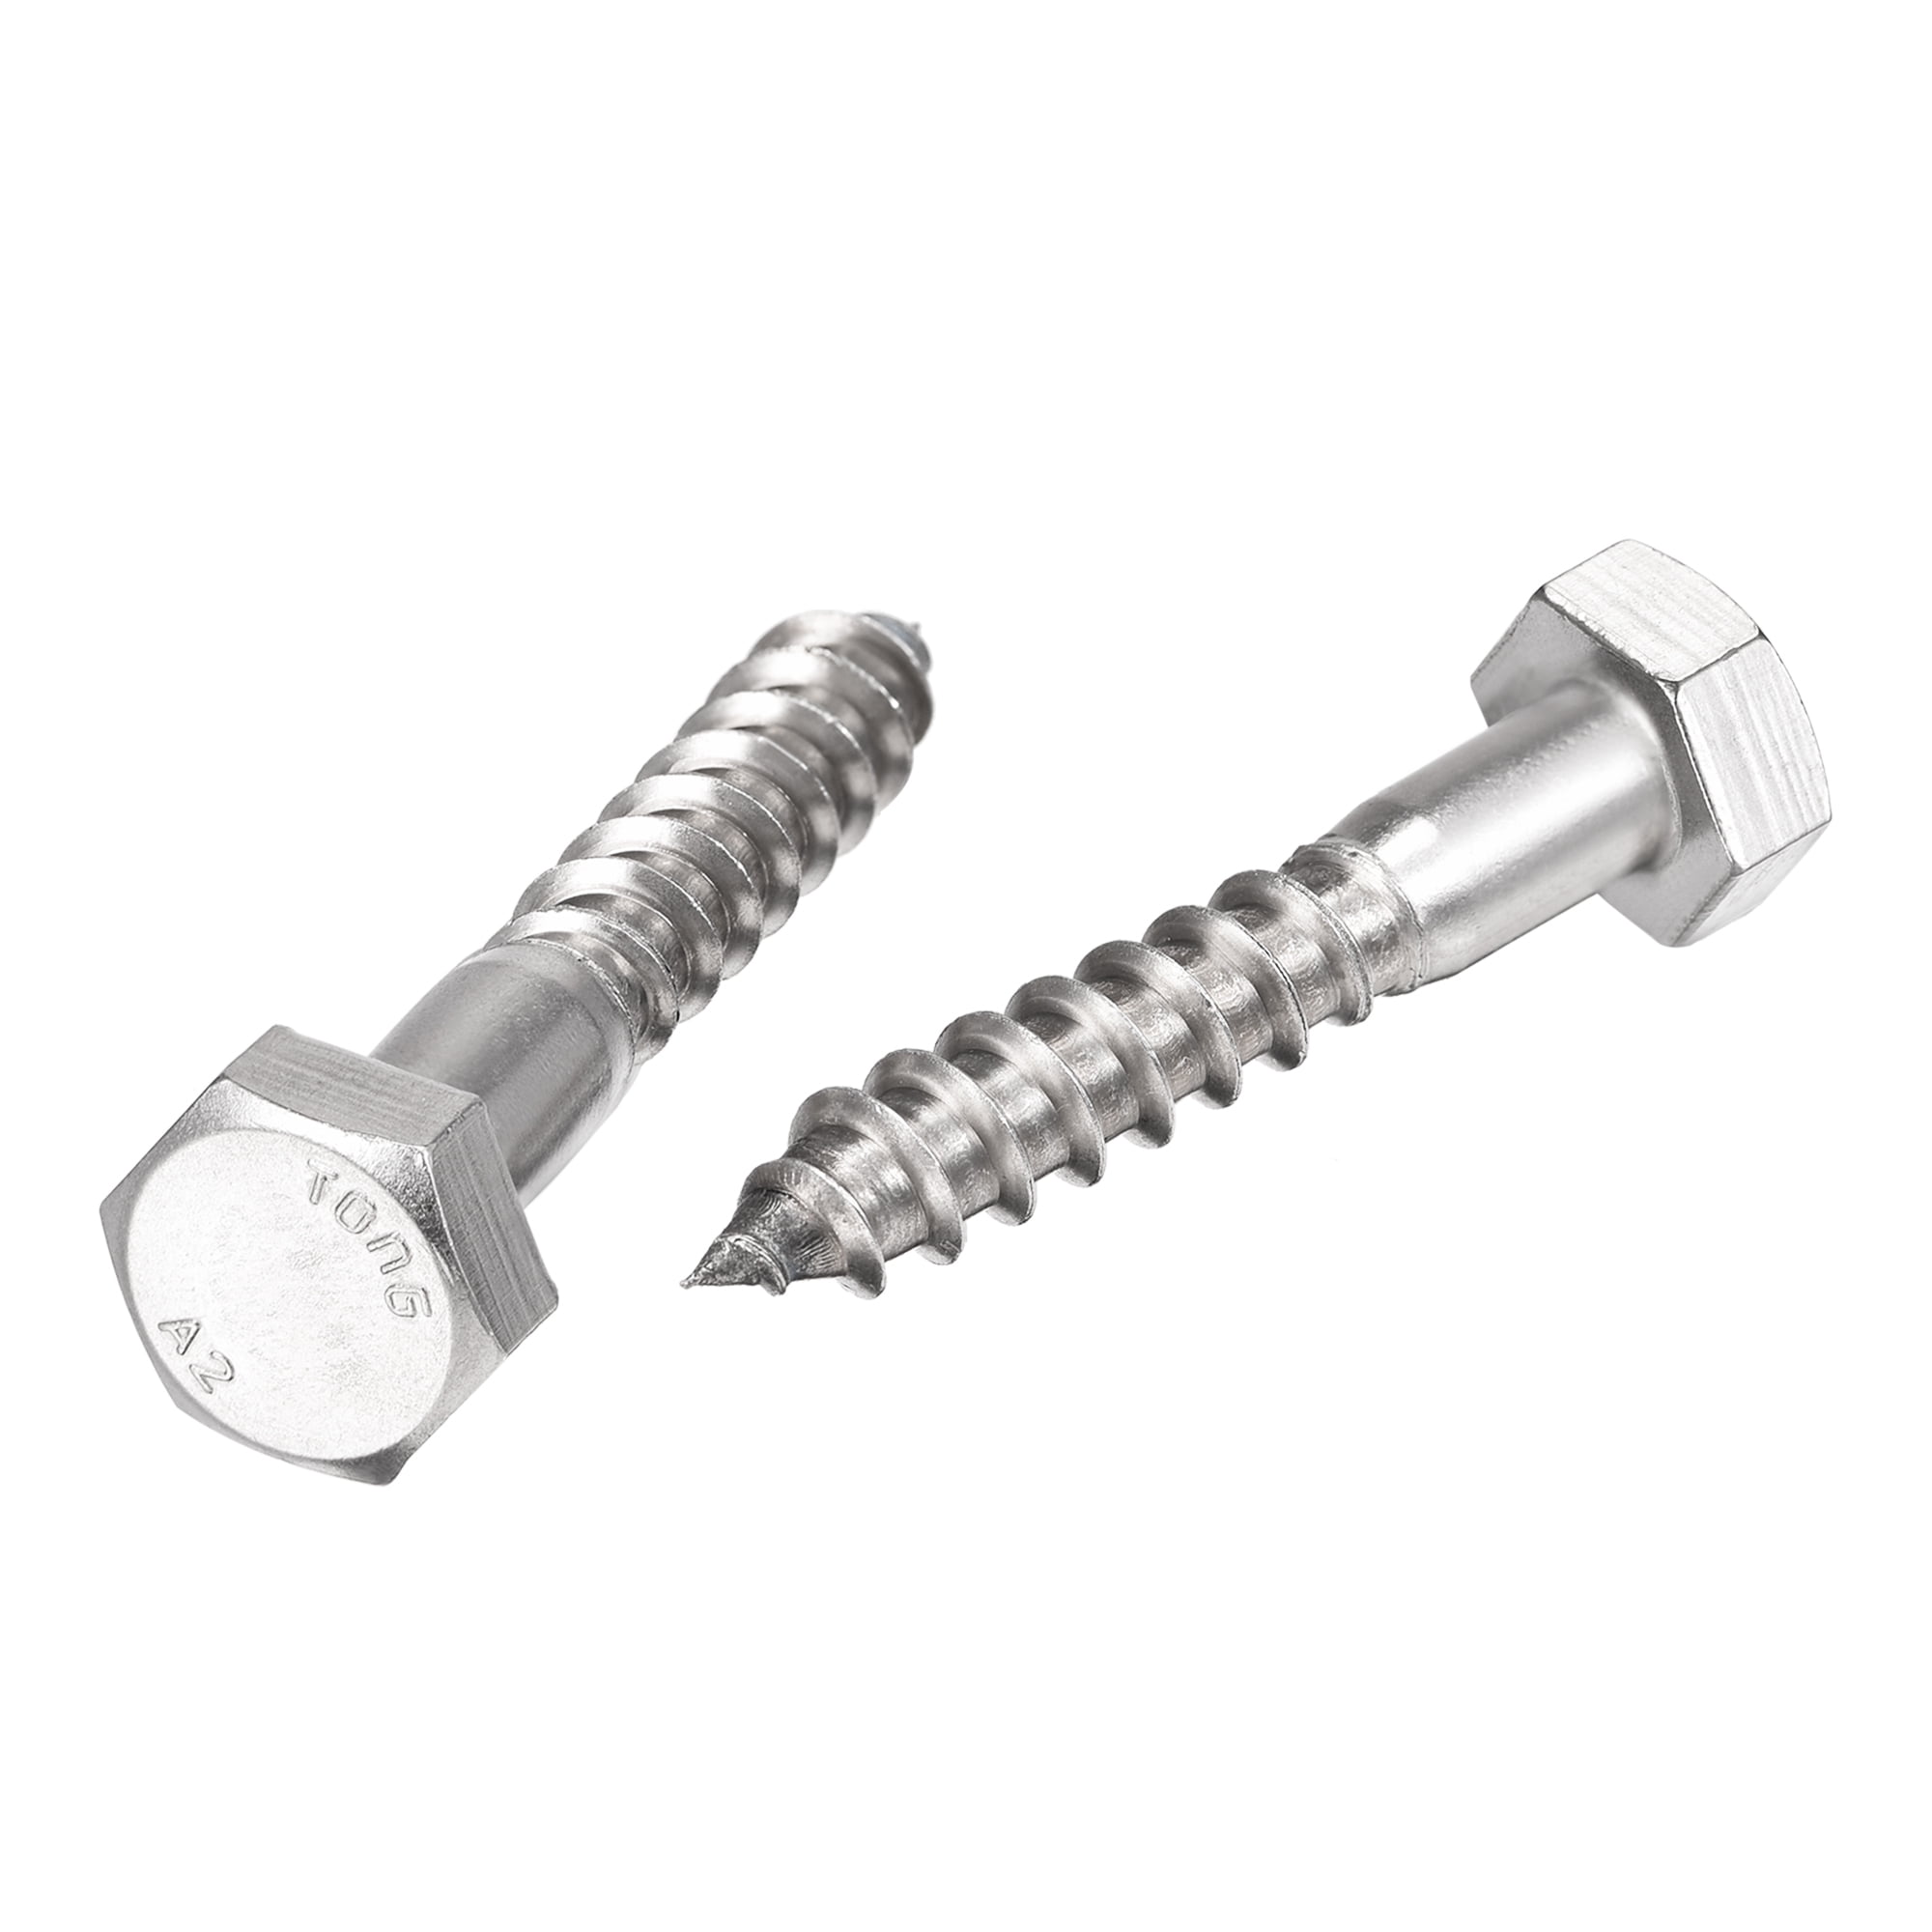 Uxcell Hex Head Lag Screws Bolts, 1/4 x 1-1/4 304 Stainless Steel Partial  Thread Wood Screws, 25 Pack 